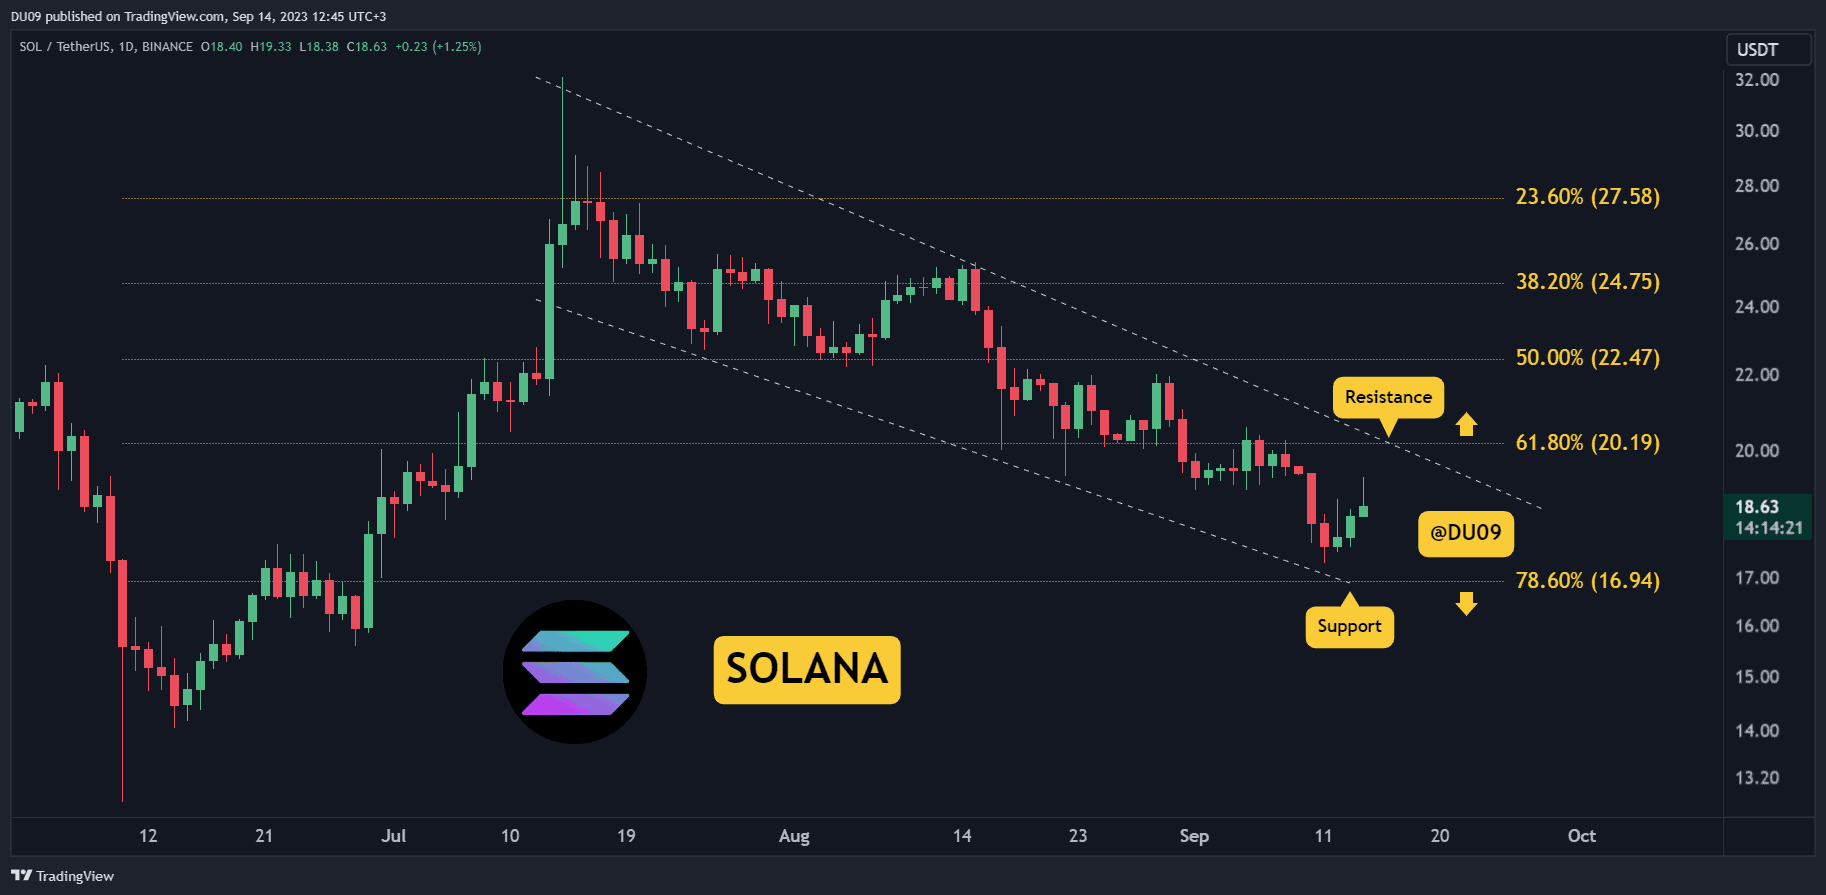 Sol-relief-rally-in-progress:-how-high-can-it-get-before-bears-return?-(solana-price-analysis)